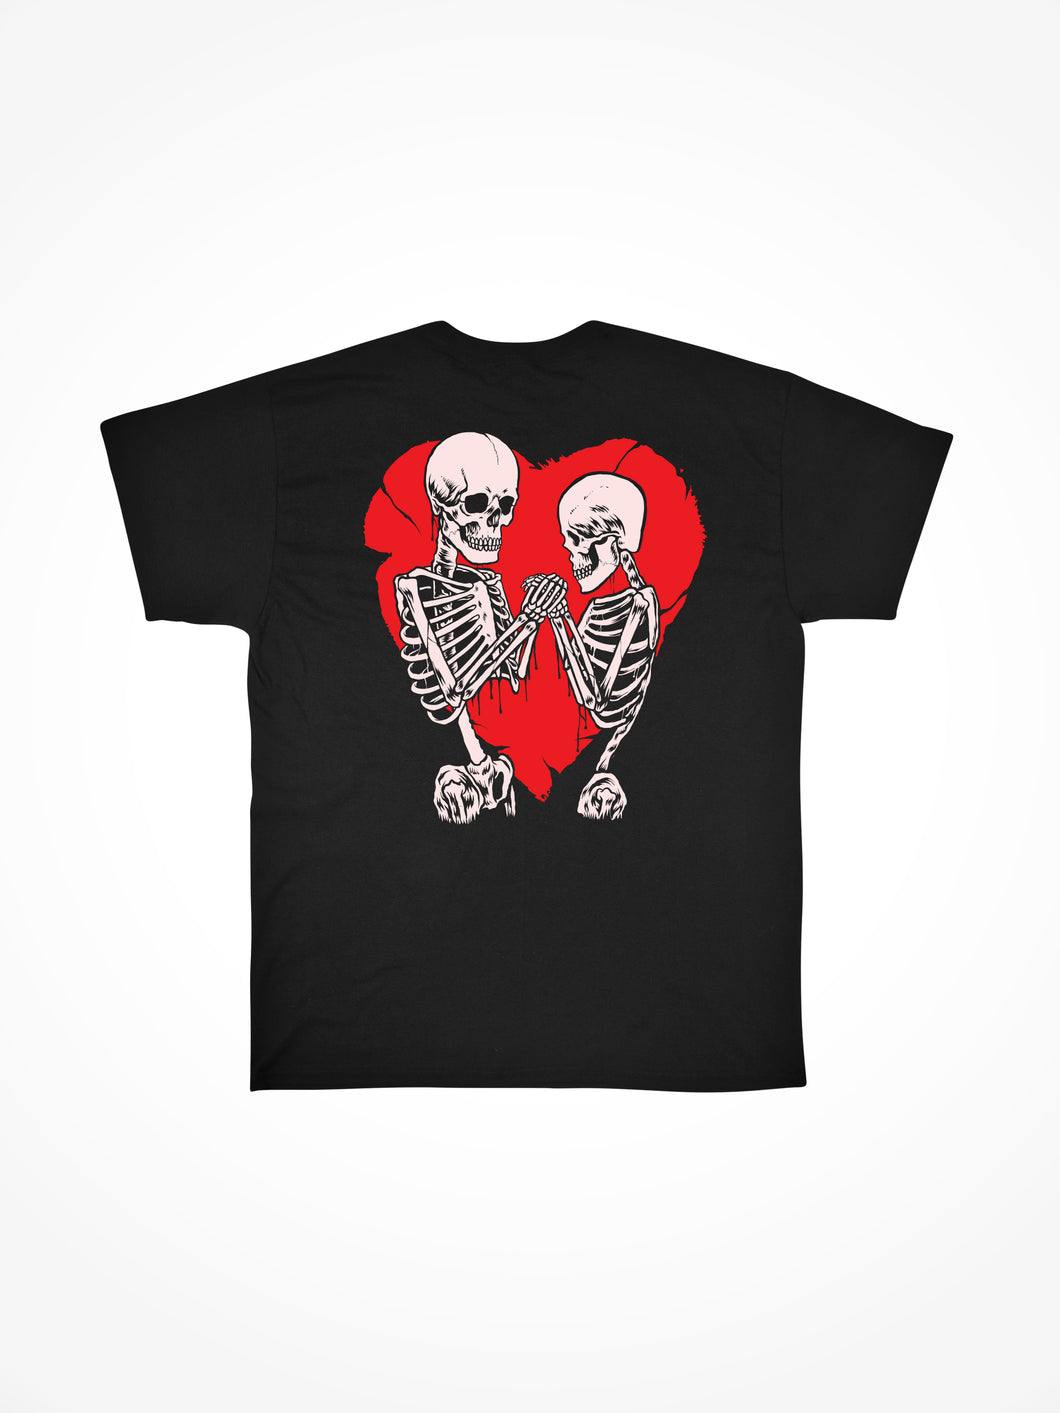 In Love and Death - Black Tee